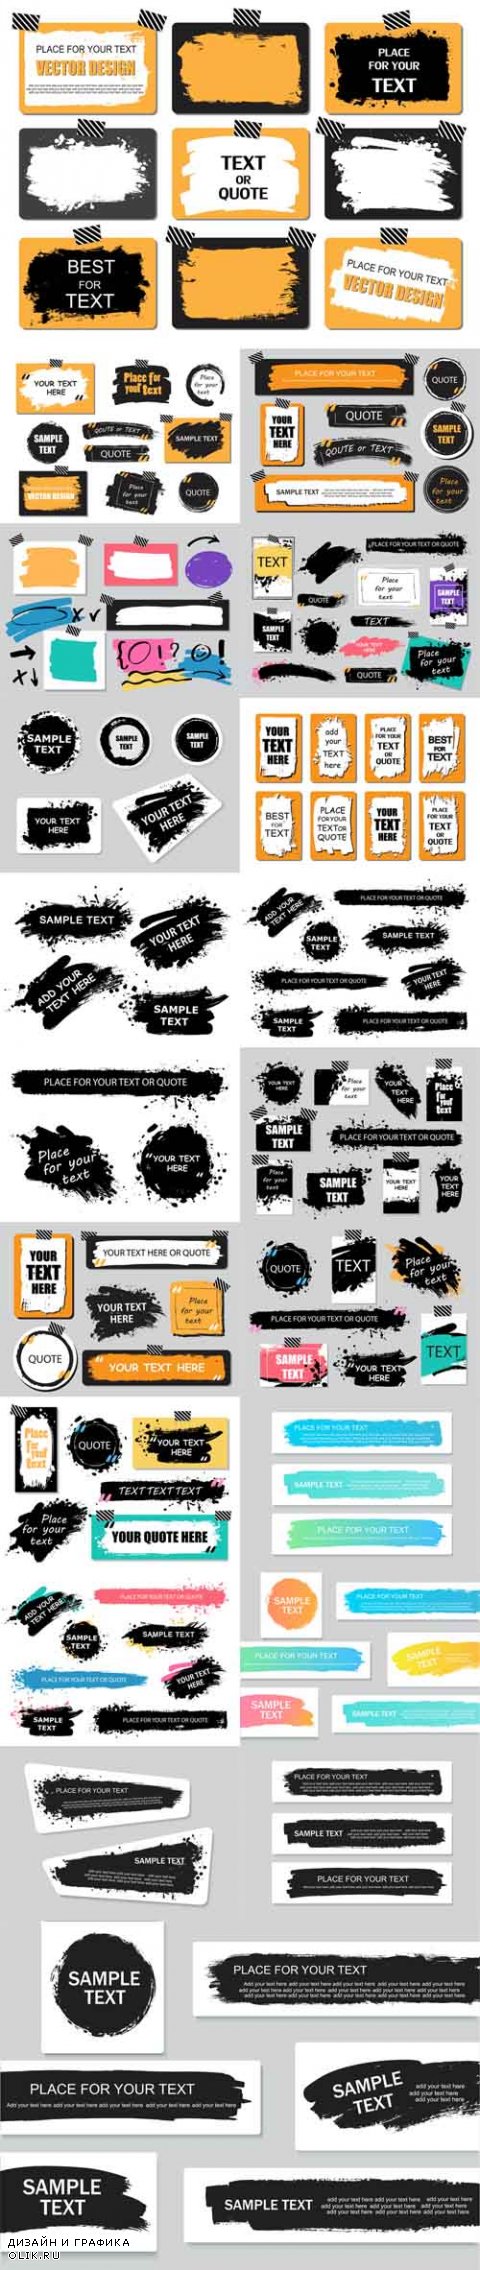 Vector Quote or Text Boxes Collection. Hand Drawn Frames Square Rectangle and Round Shapes